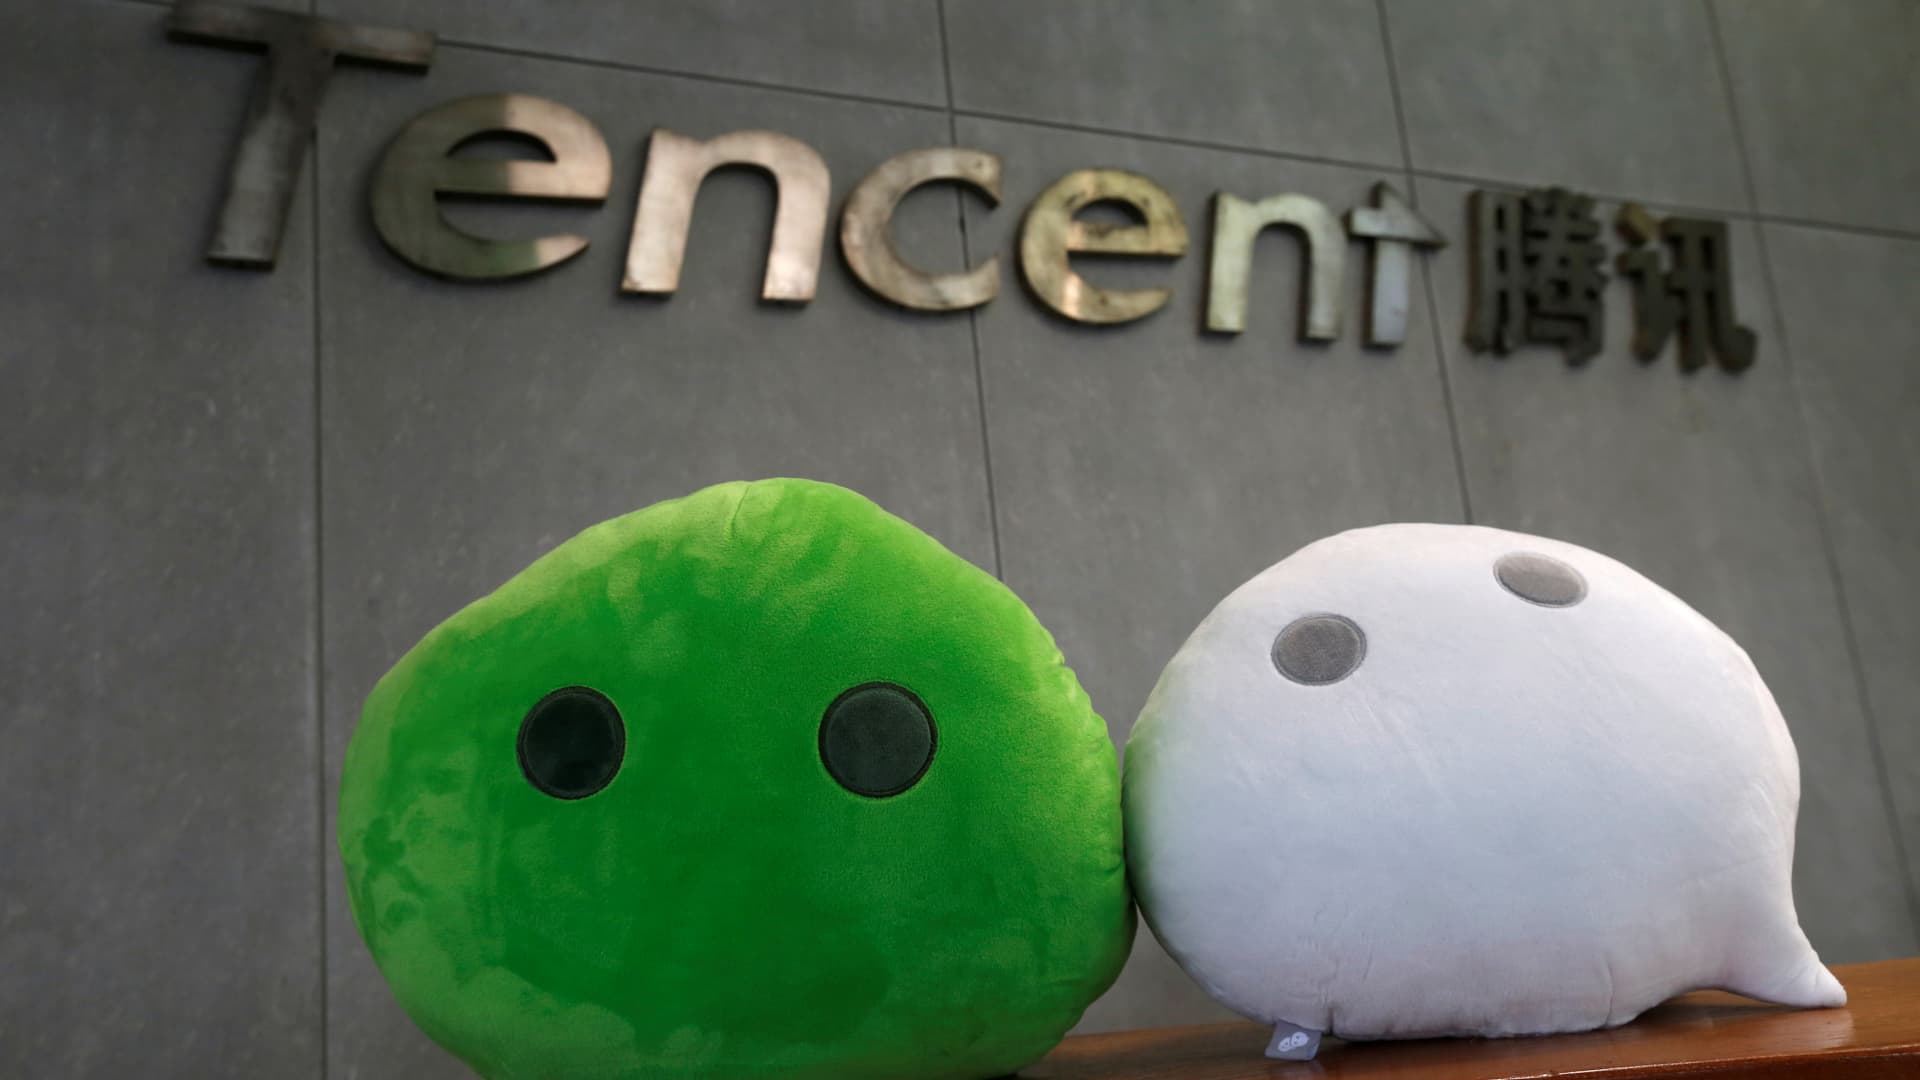 Tencent, the $370 billion Chinese tech giant, posts first ever revenue decline